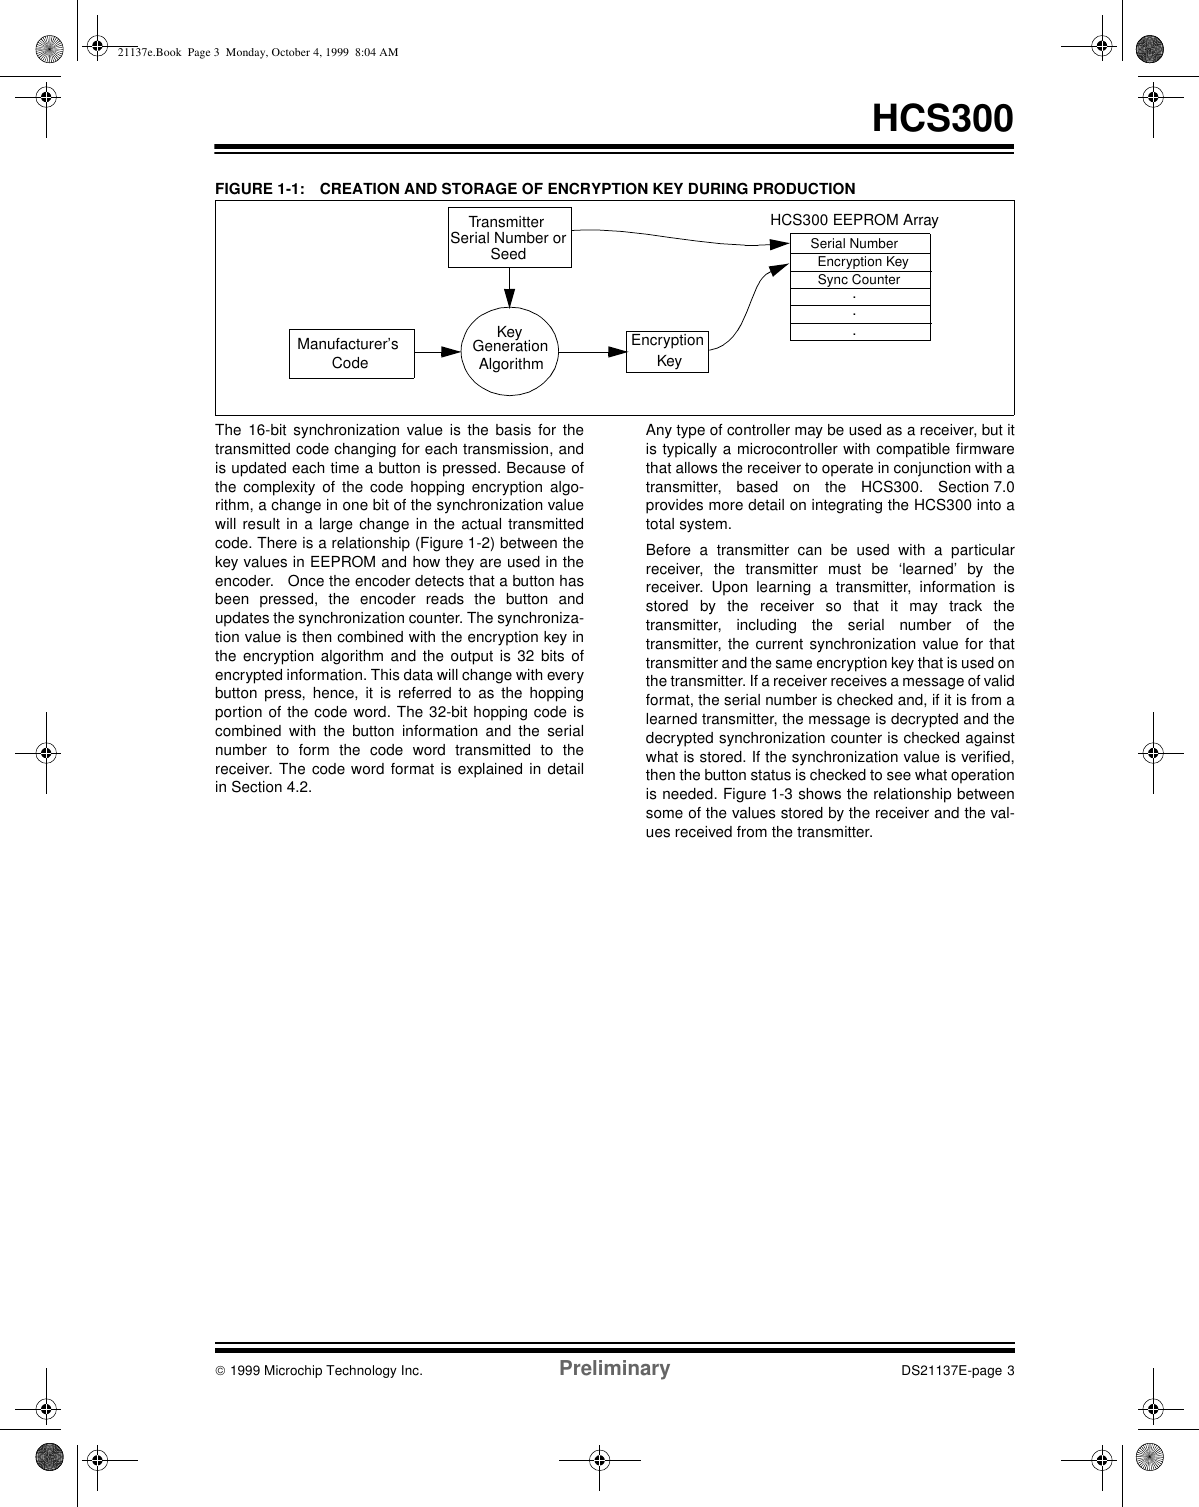  1999 Microchip Technology Inc. Preliminary DS21137E-page 3HCS300FIGURE 1-1: CREATION AND STORAGE OF ENCRYPTION KEY DURING PRODUCTIONThe 16-bit synchronization value is the basis for thetransmitted code changing for each transmission, andis updated each time a button is pressed. Because ofthe complexity of the code hopping encryption algo-rithm, a change in one bit of the synchronization valuewill result in a large change in the actual transmittedcode. There is a relationship (Figure 1-2) between thekey values in EEPROM and how they are used in theencoder.   Once the encoder detects that a button hasbeen pressed, the encoder reads the button andupdates the synchronization counter. The synchroniza-tion value is then combined with the encryption key inthe encryption algorithm and the output is 32 bits ofencrypted information. This data will change with everybutton press, hence, it is referred to as the hoppingportion of the code word. The 32-bit hopping code iscombined with the button information and the serialnumber to form the code word transmitted to thereceiver. The code word format is explained in detailin Section 4.2. Any type of controller may be used as a receiver, but itis typically a microcontroller with compatible firmwarethat allows the receiver to operate in conjunction with atransmitter, based on the HCS300. Section 7.0provides more detail on integrating the HCS300 into atotal system.Before a transmitter can be used with a particularreceiver, the transmitter must be ‘learned’ by thereceiver. Upon learning a transmitter, information isstored by the receiver so that it may track thetransmitter, including the serial number of thetransmitter, the current synchronization value for thattransmitter and the same encryption key that is used onthe transmitter. If a receiver receives a message of validformat, the serial number is checked and, if it is from alearned transmitter, the message is decrypted and thedecrypted synchronization counter is checked againstwhat is stored. If the synchronization value is verified,then the button status is checked to see what operationis needed. Figure 1-3 shows the relationship betweensome of the values stored by the receiver and the val-ues received from the transmitter. Transmitter Manufacturer’s Serial Number orCodeEncryption KeyKeyGenerationAlgorithmSerial NumberEncryption KeySync Counter...HCS300 EEPROM ArraySeed21137e.Book  Page 3  Monday, October 4, 1999  8:04 AM